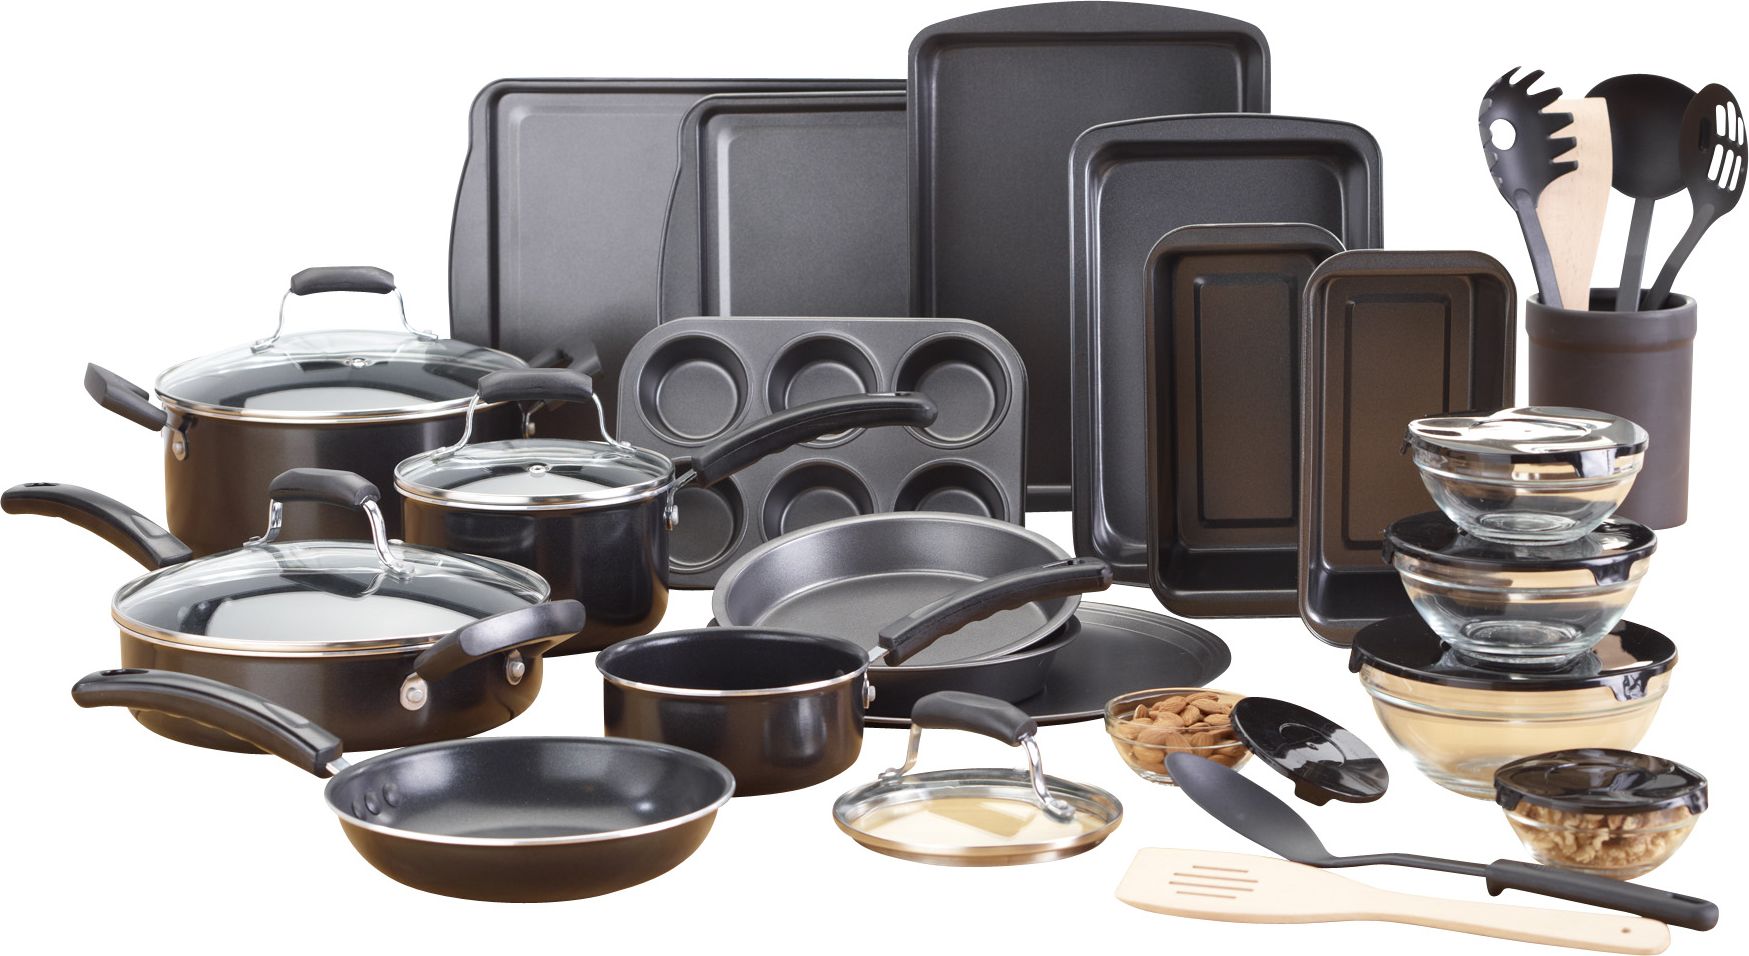 36 Piece Cookware Set  Welcome To Life Startup Essentials